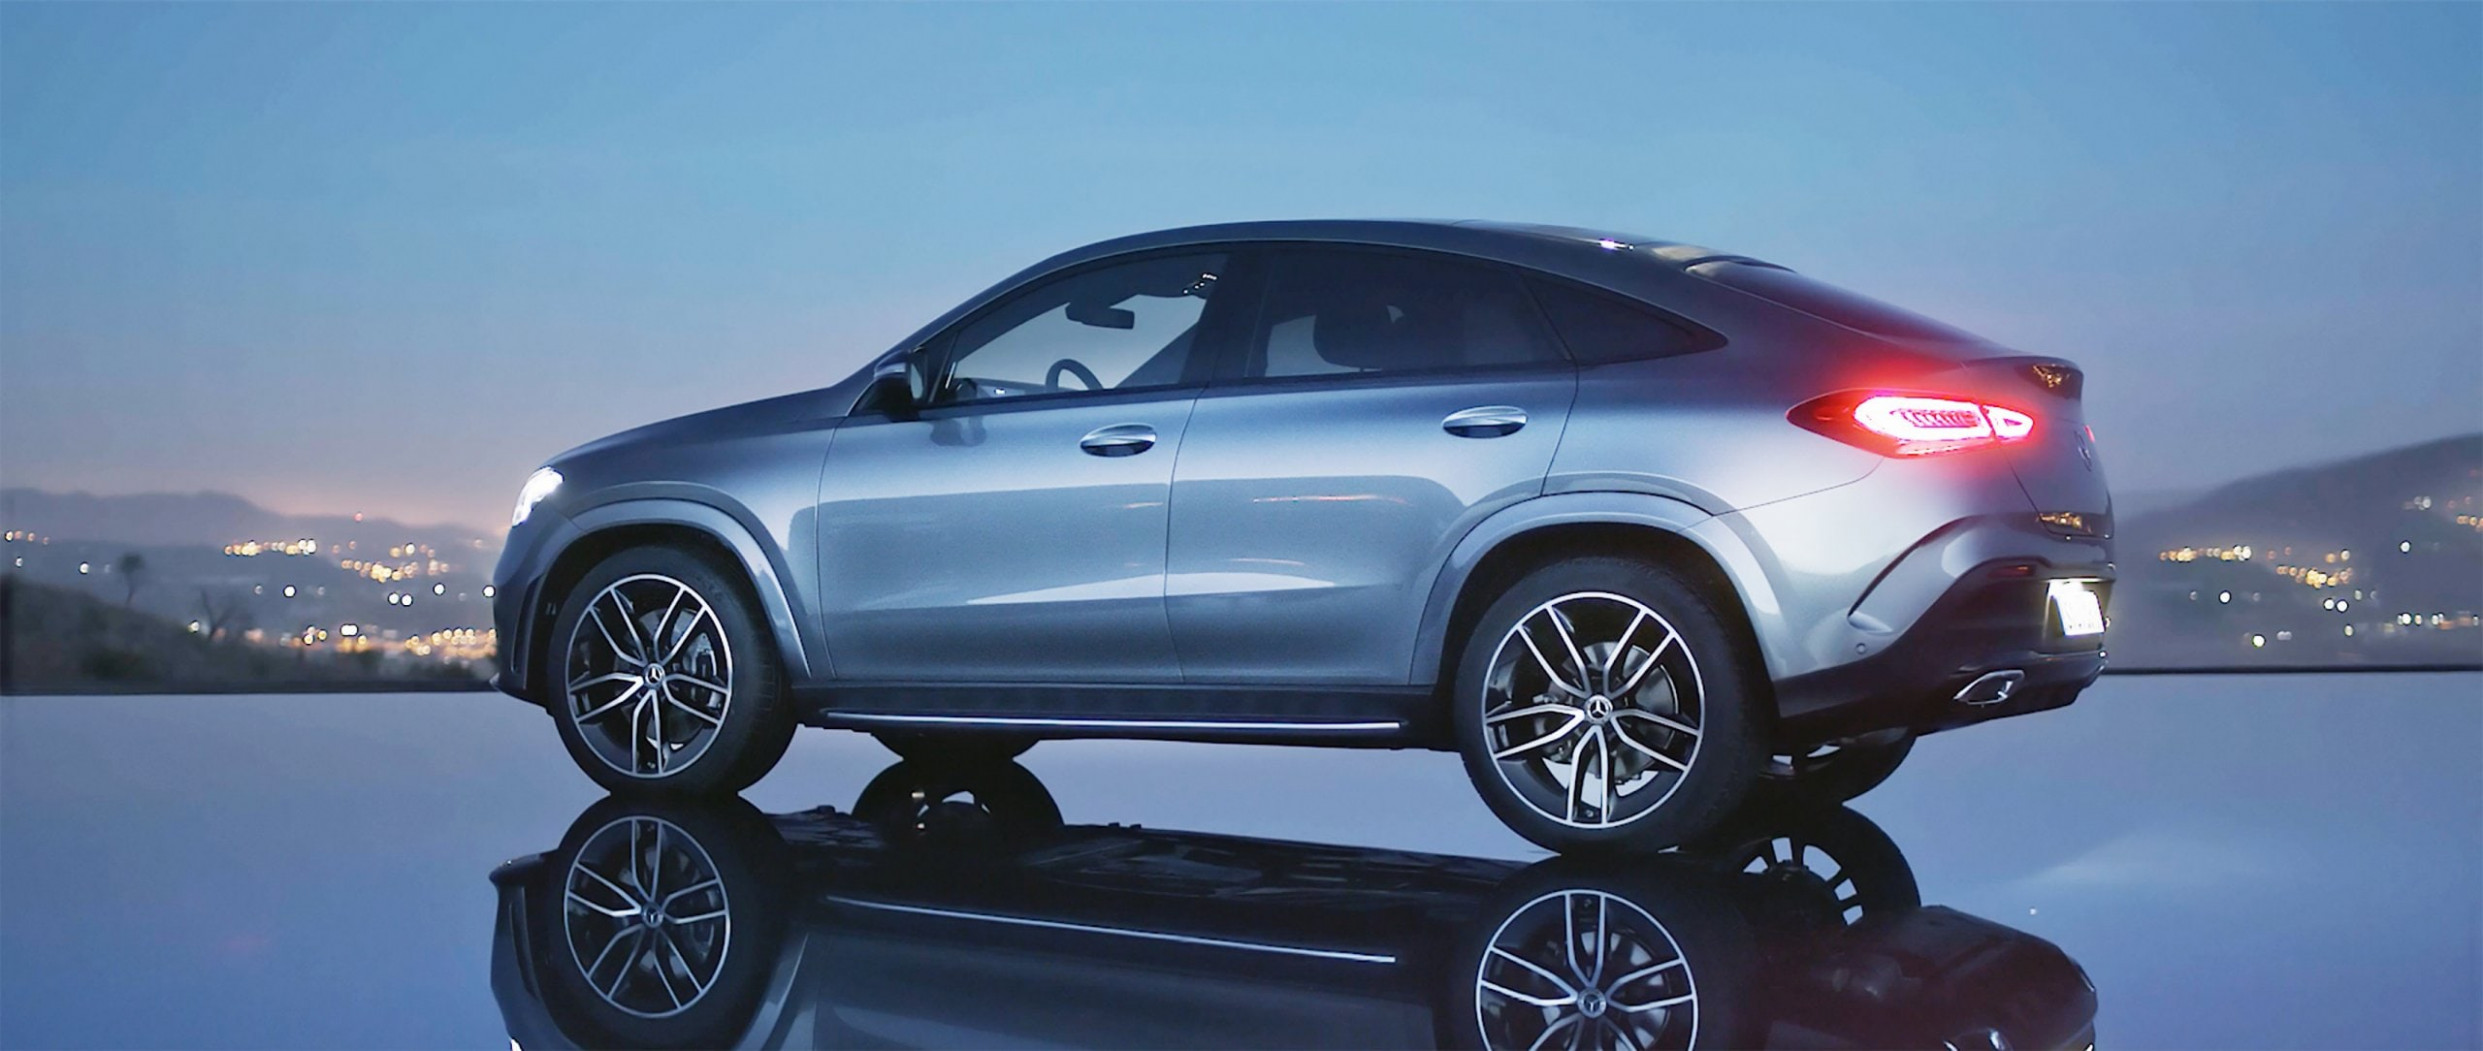 Overview mercedes benz gle coupe